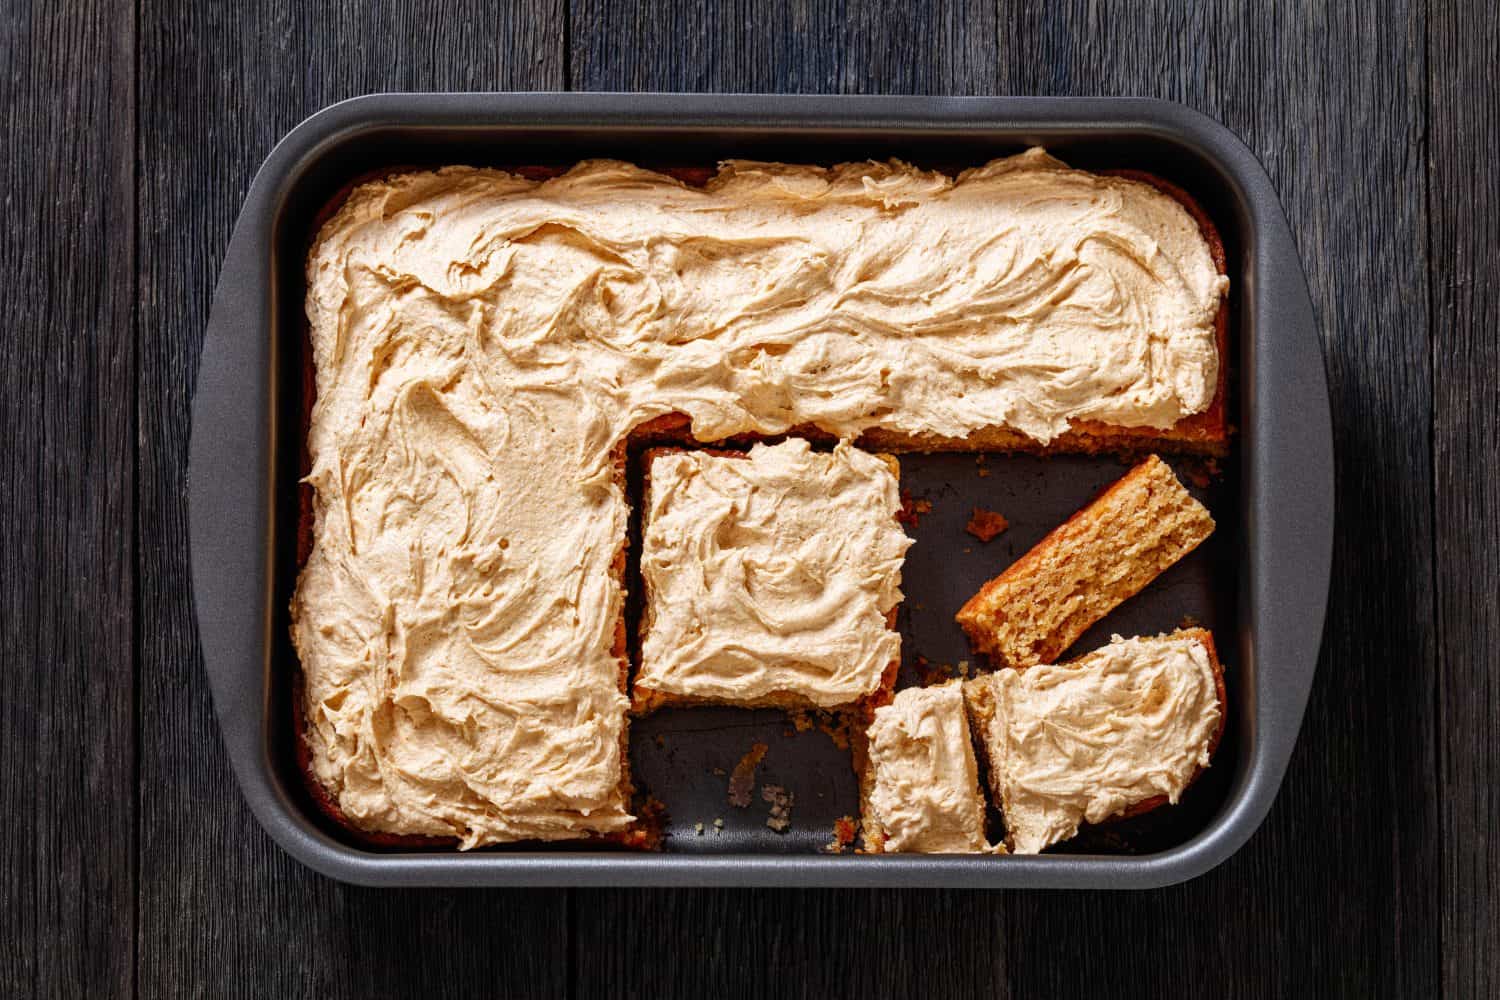 Peanut Butter Sheet Cake topped with super creamy and sweet peanut butter icing in a baking dish, horizontal view from above, american dessert, flat lay